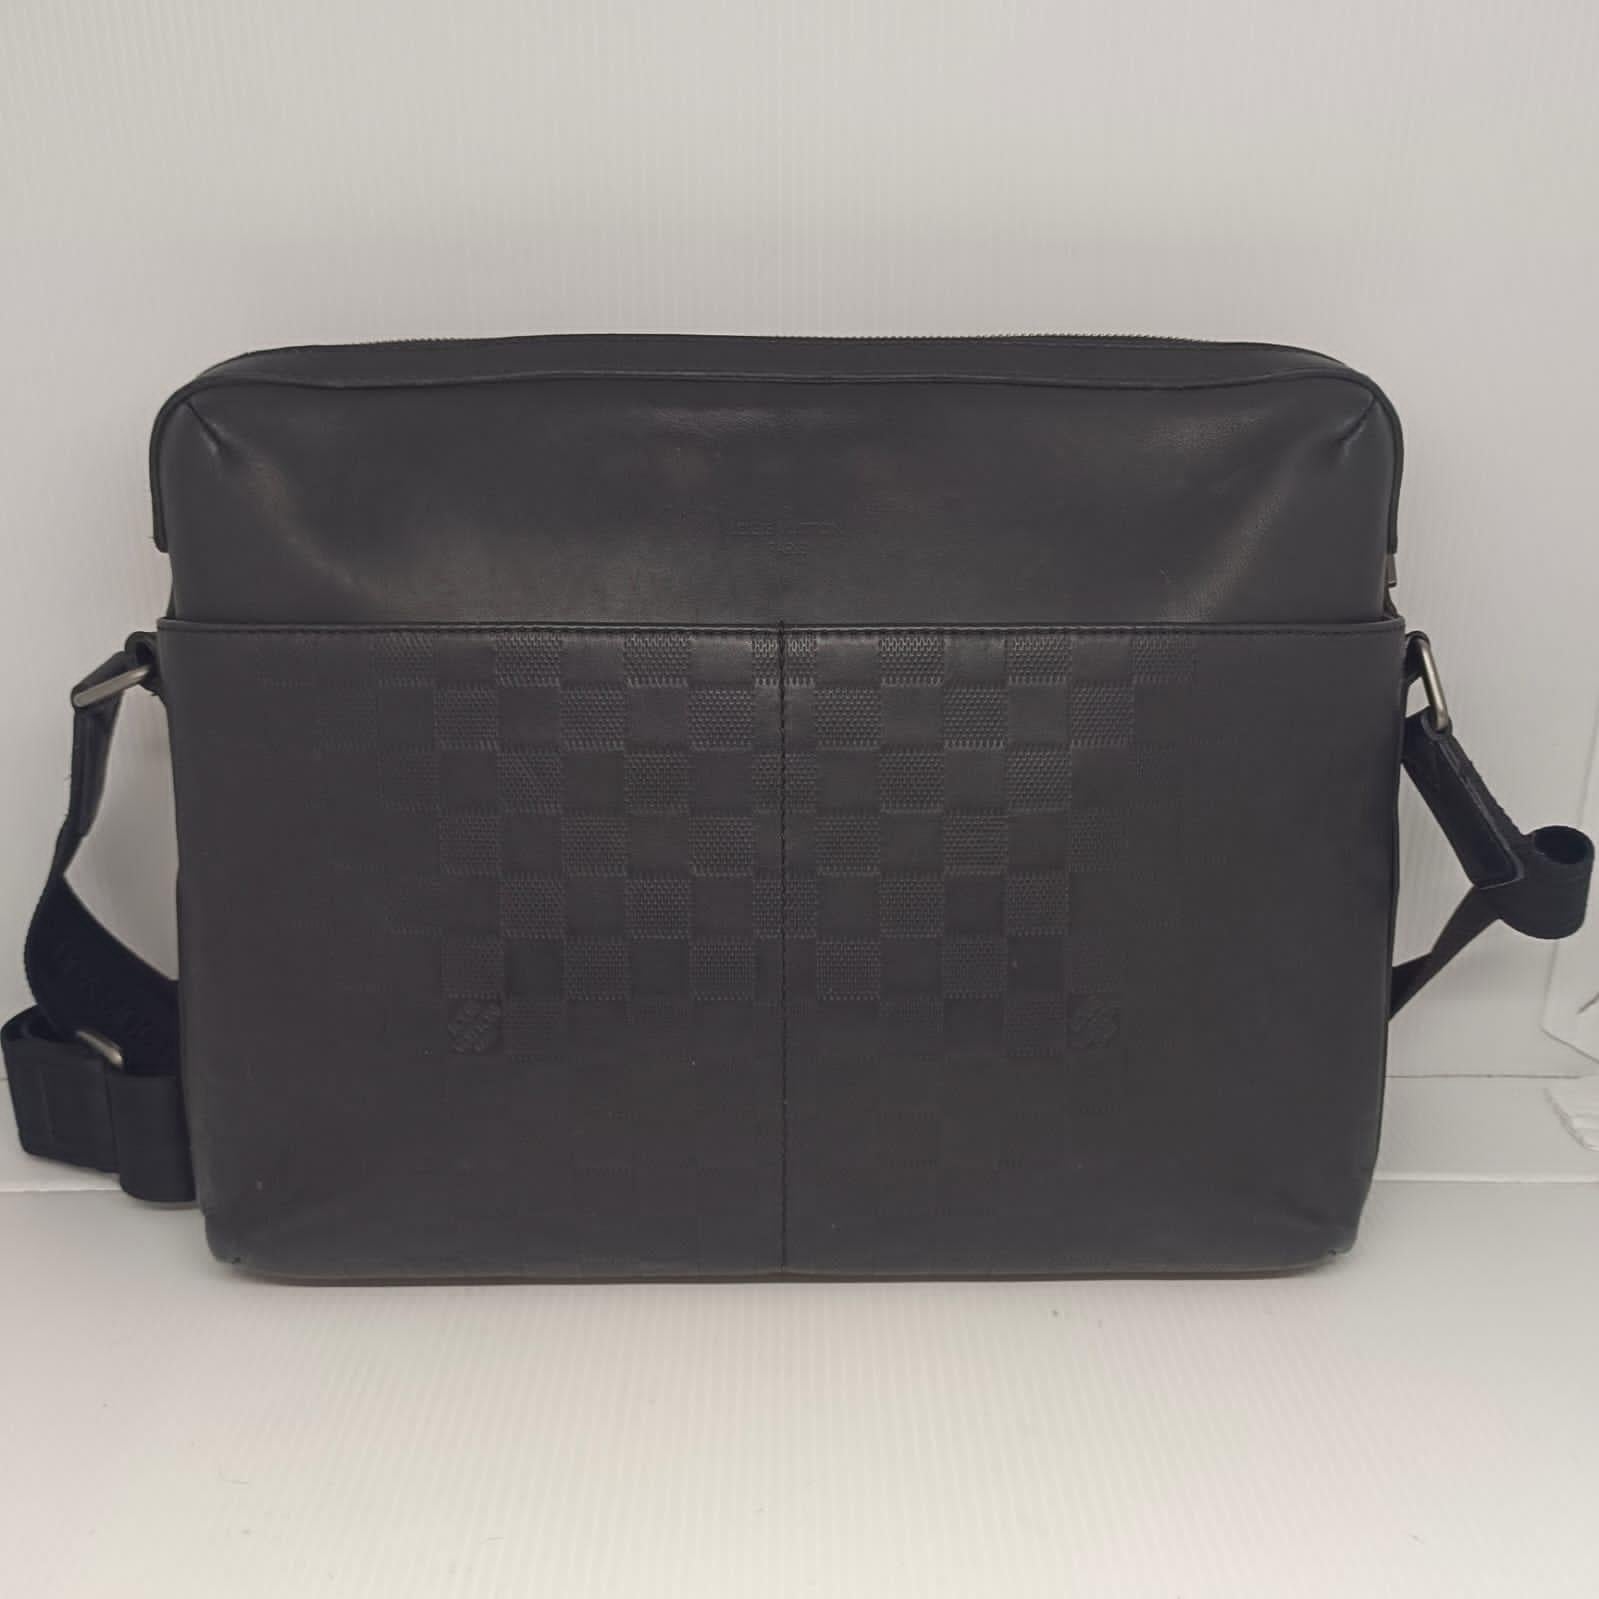 Damier infini calypso mm bag in black leather. Slight signs of wear throughout with faint scratches and scuffs. Faint white marks on the exterior leather. Lining is clean. Comes with its dust bag.